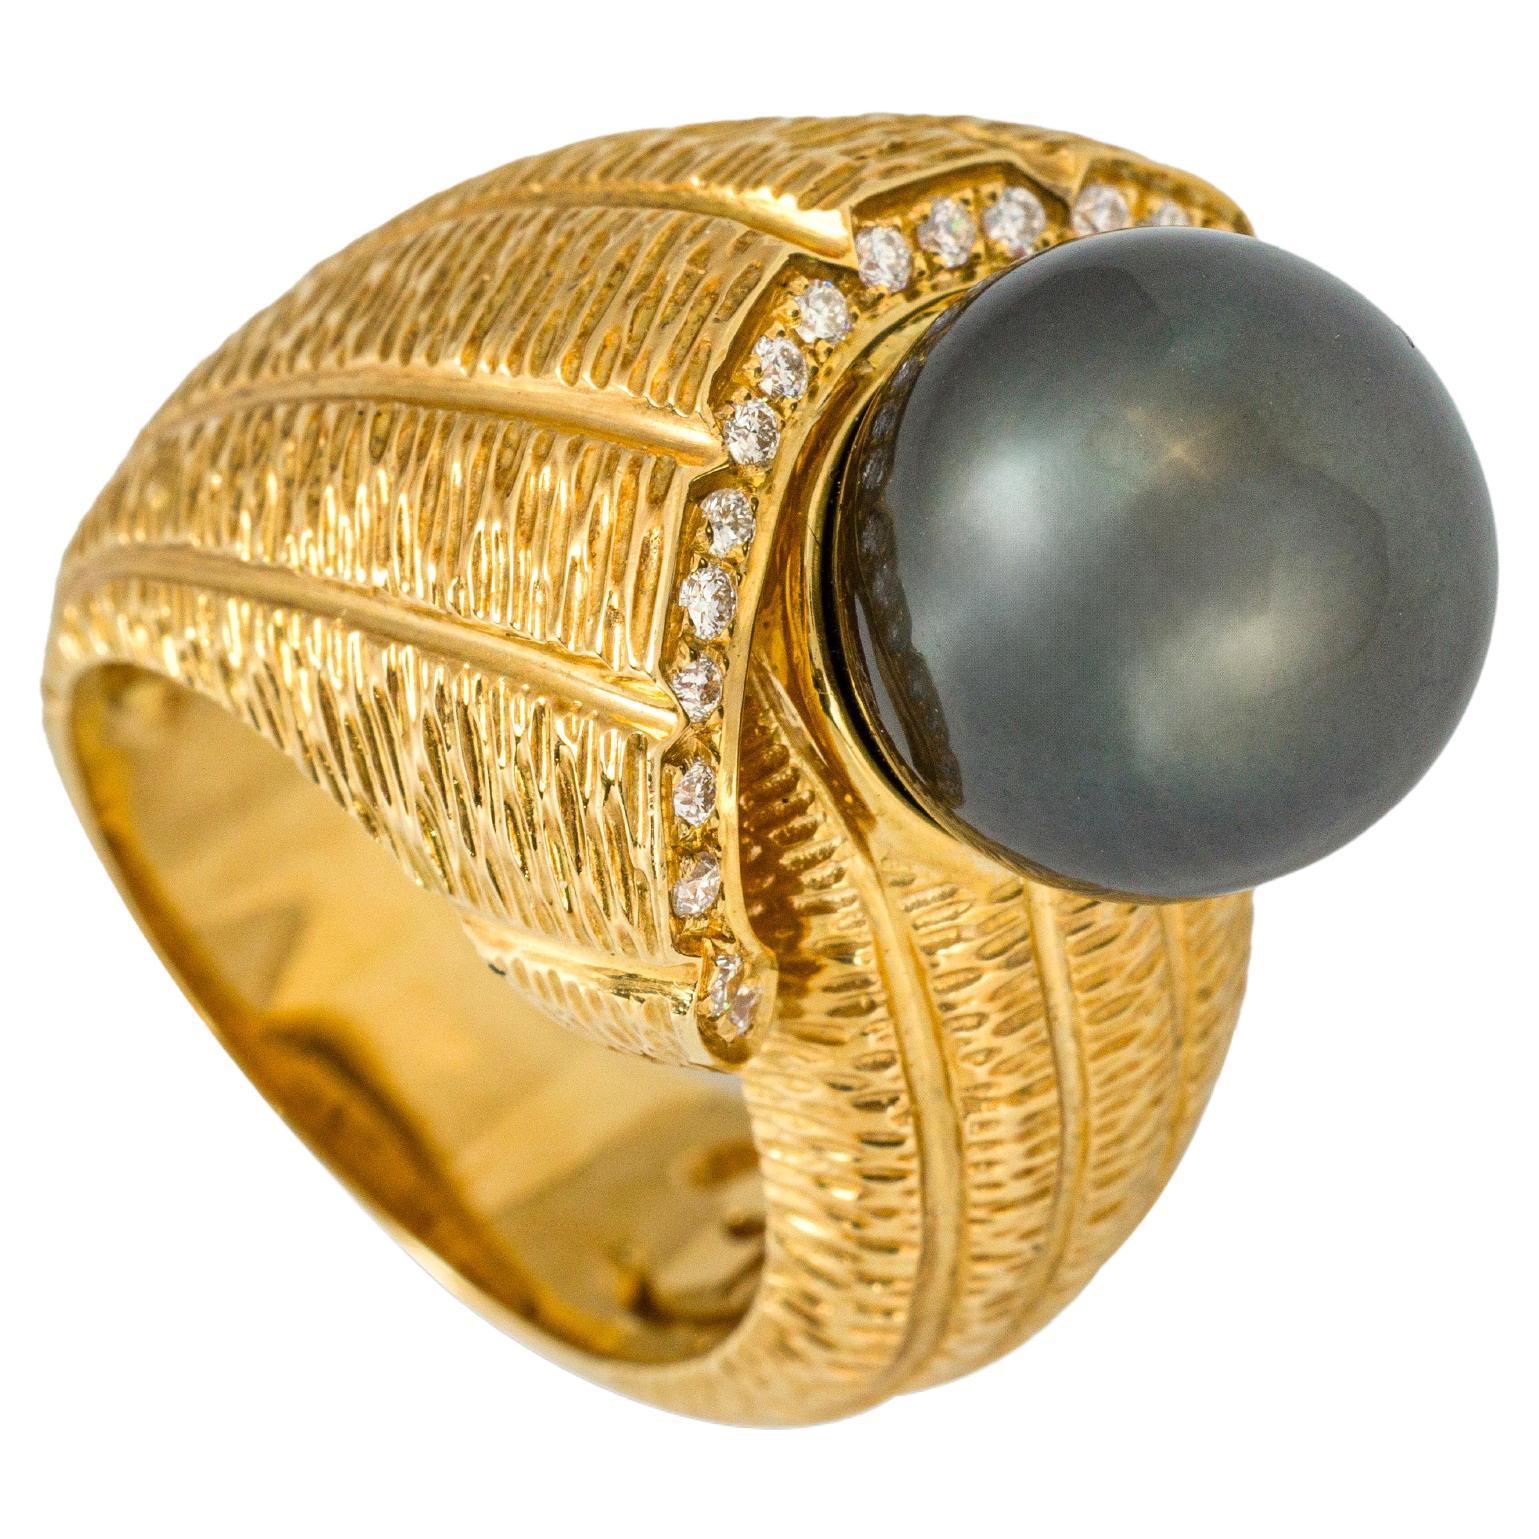 "Costis" Snail Shell Ring with South Sea Black Pearl of 3.03 grams 